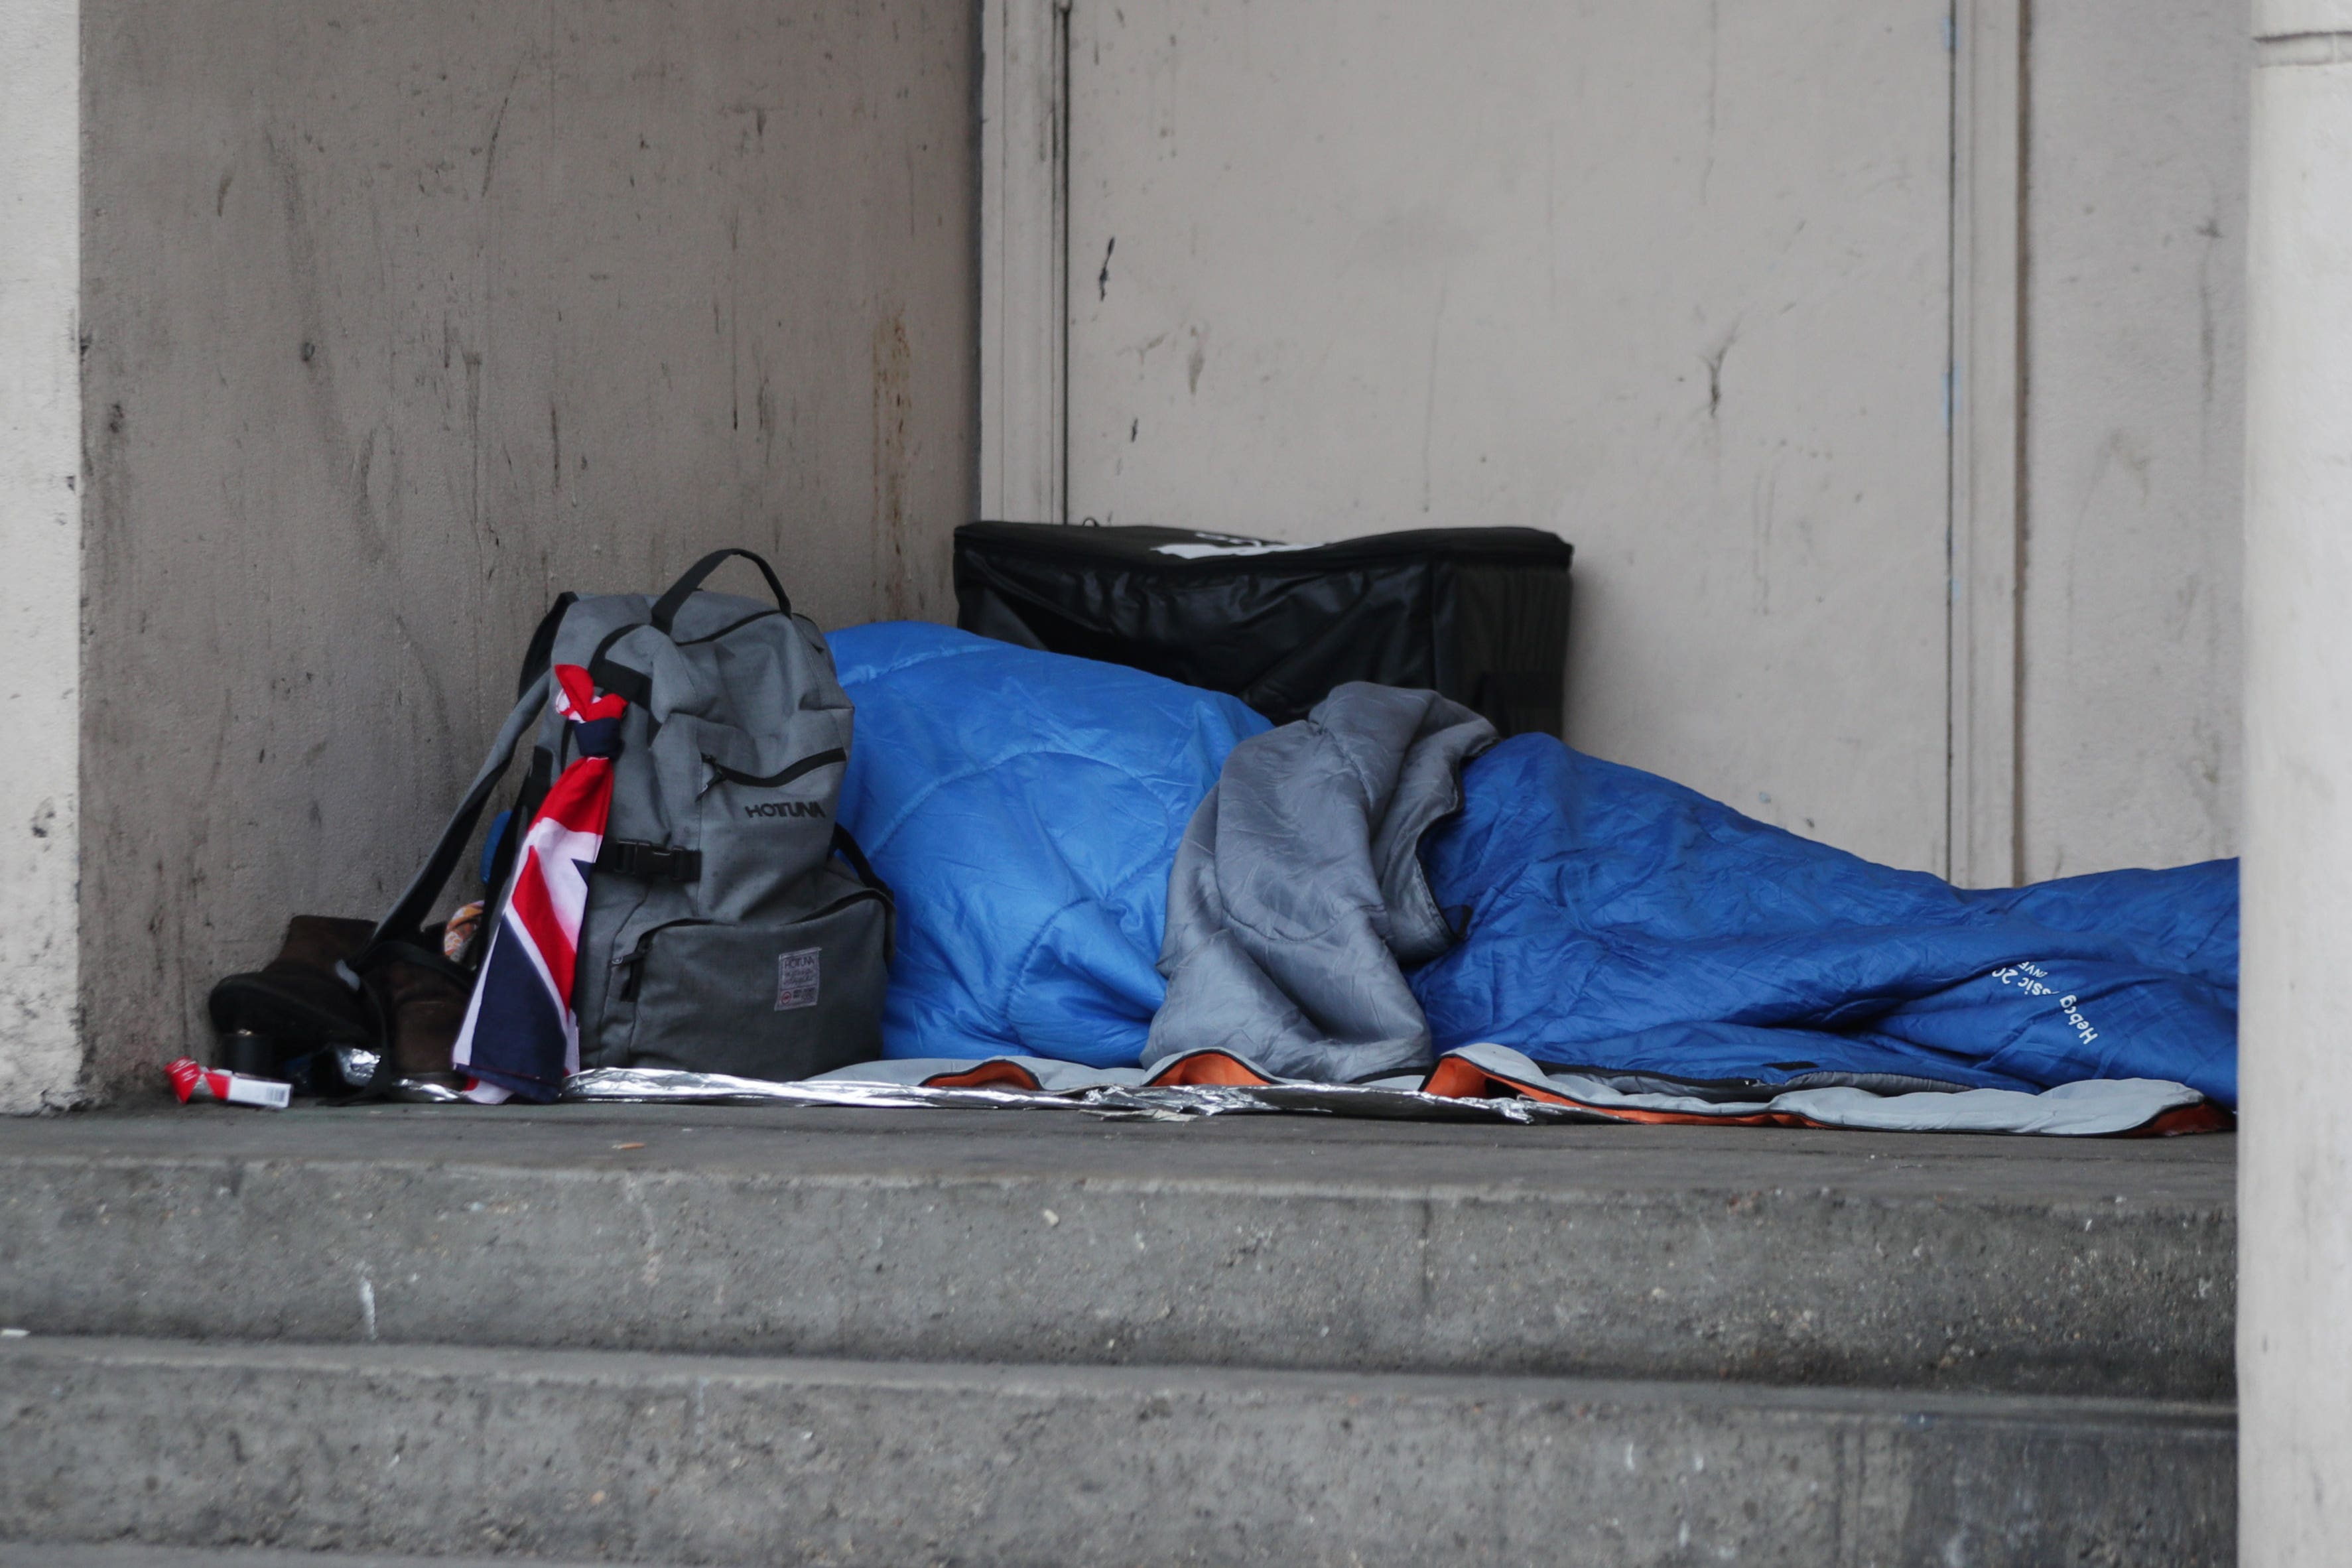 The leader of Crawley Borough Council said costs and homelessness were ‘accelerating’ and stressed the town had become ‘an asylum dispersal city by the back door’